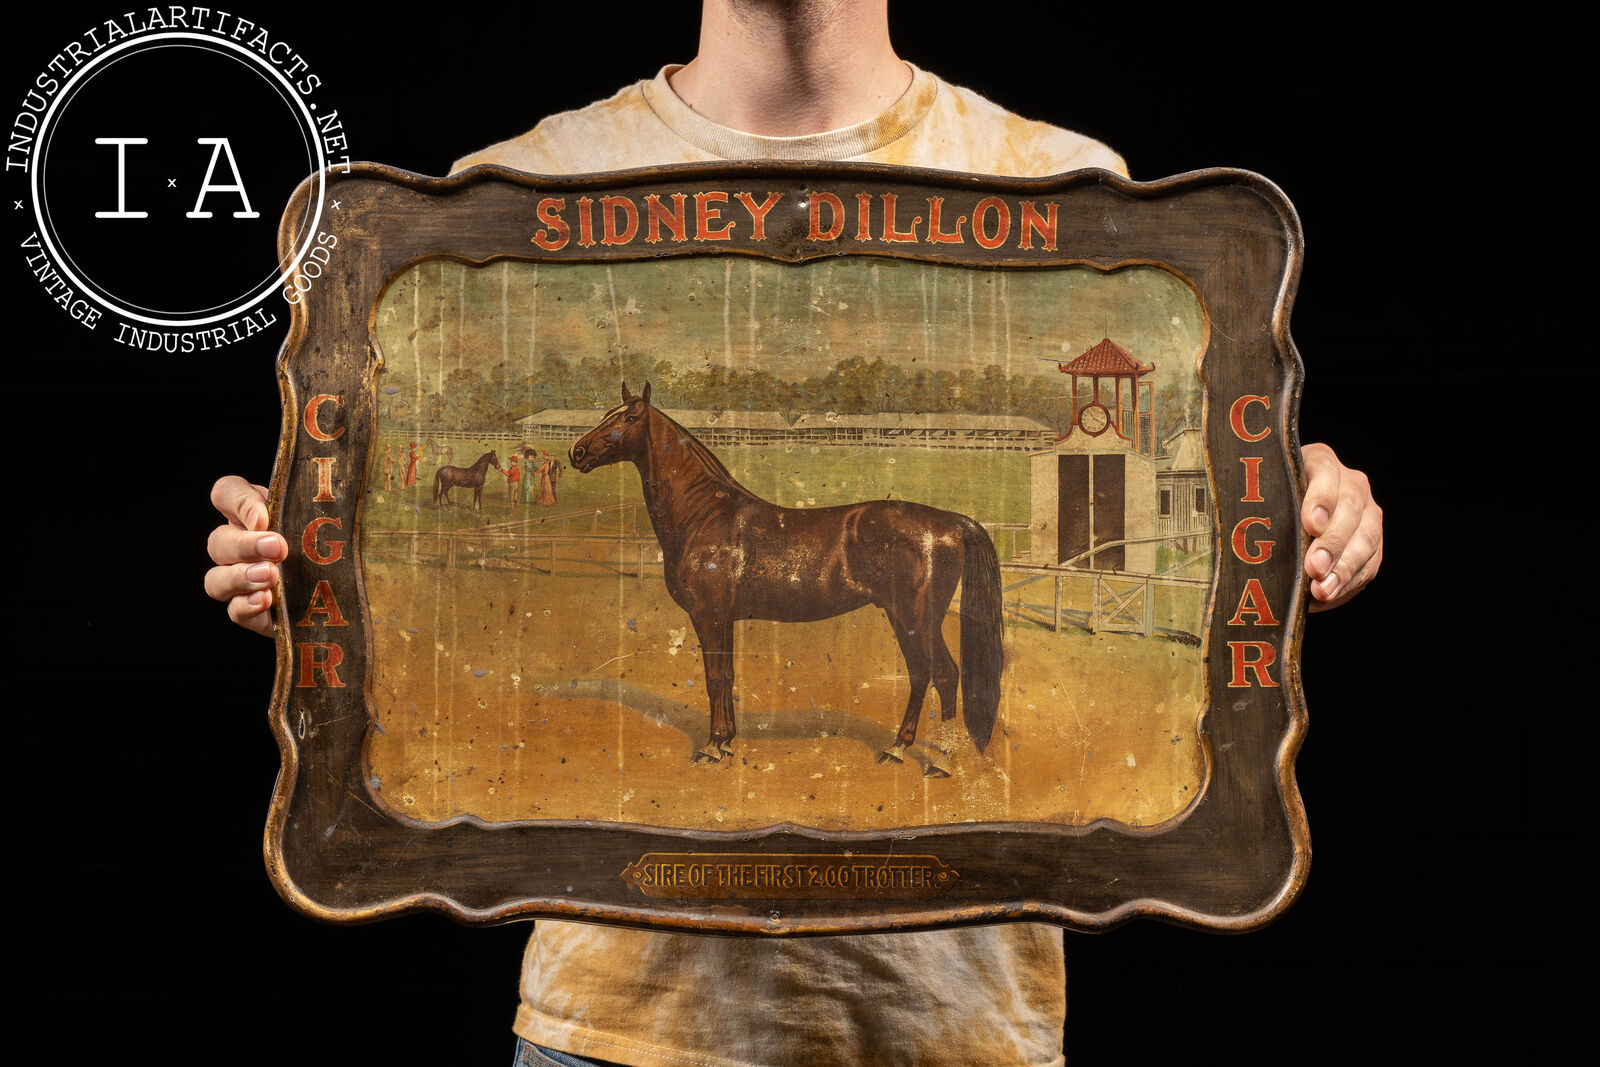 Early 20th Century Sidney Dillon Cigars Self-Framed Tin Litho Advertising Sign